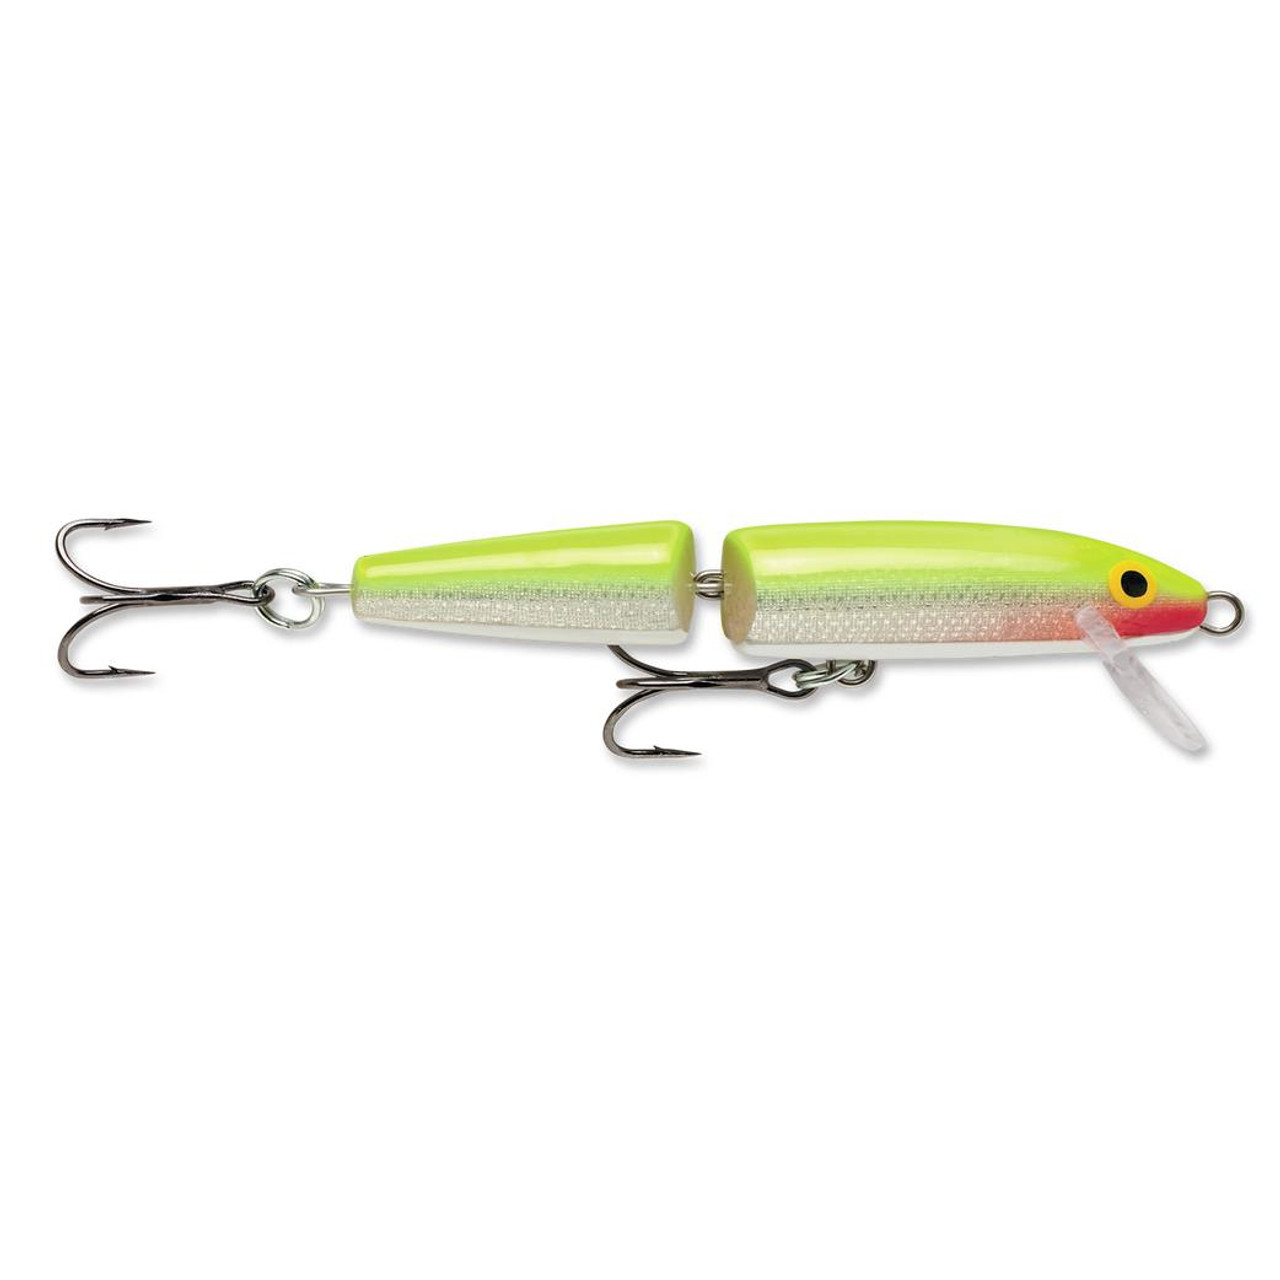 https://cdn11.bigcommerce.com/s-70mih4s/images/stencil/1280x1280/products/5235/64761/Rapala-11-Original-Rapala-Jointed-Floating-Jerkbait-022677003504_image4__10549.1711564160.jpg?c=2